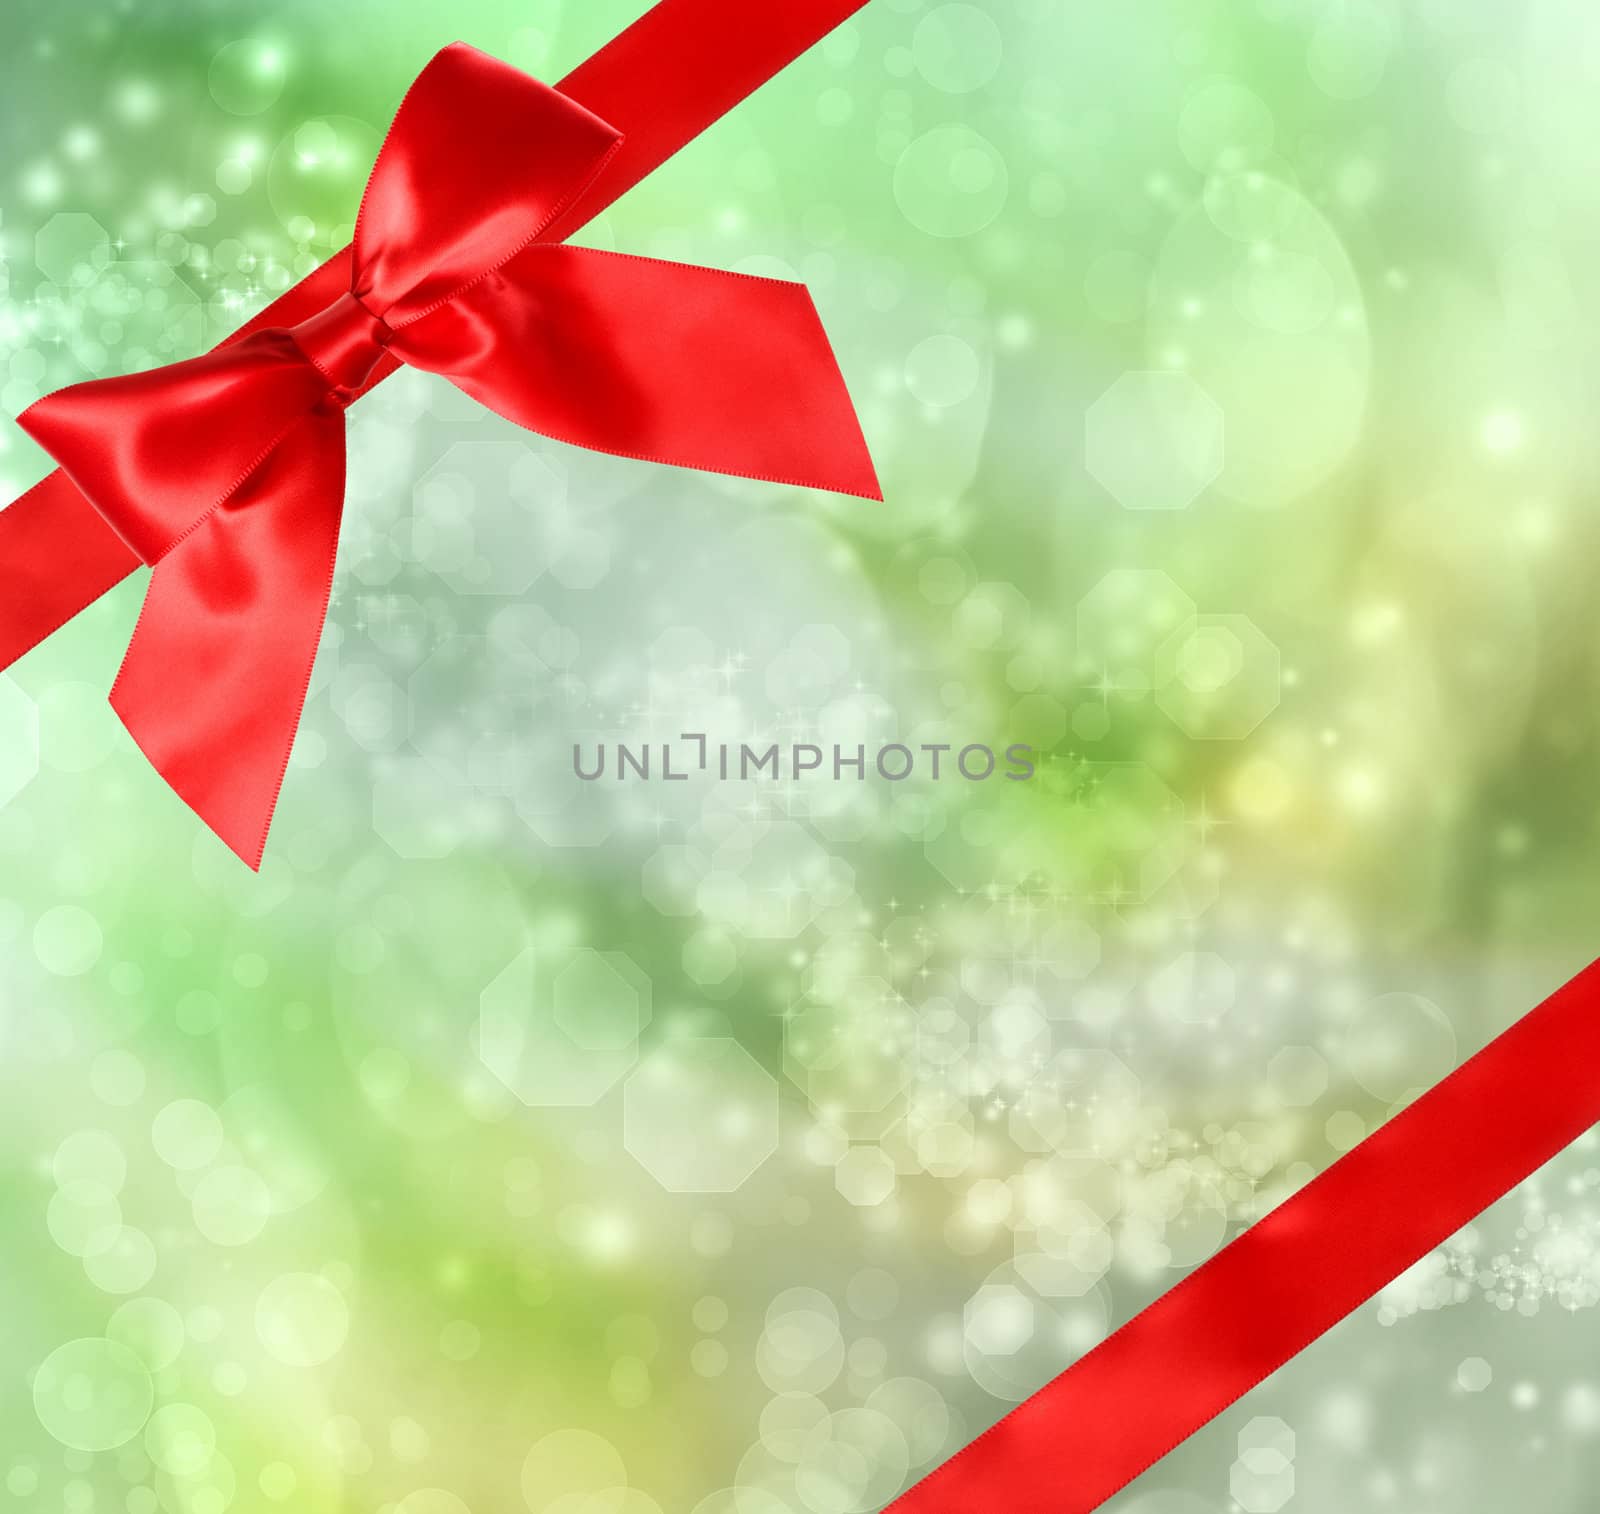 Red Bow and Ribbon with Green Bokeh Lights Background 